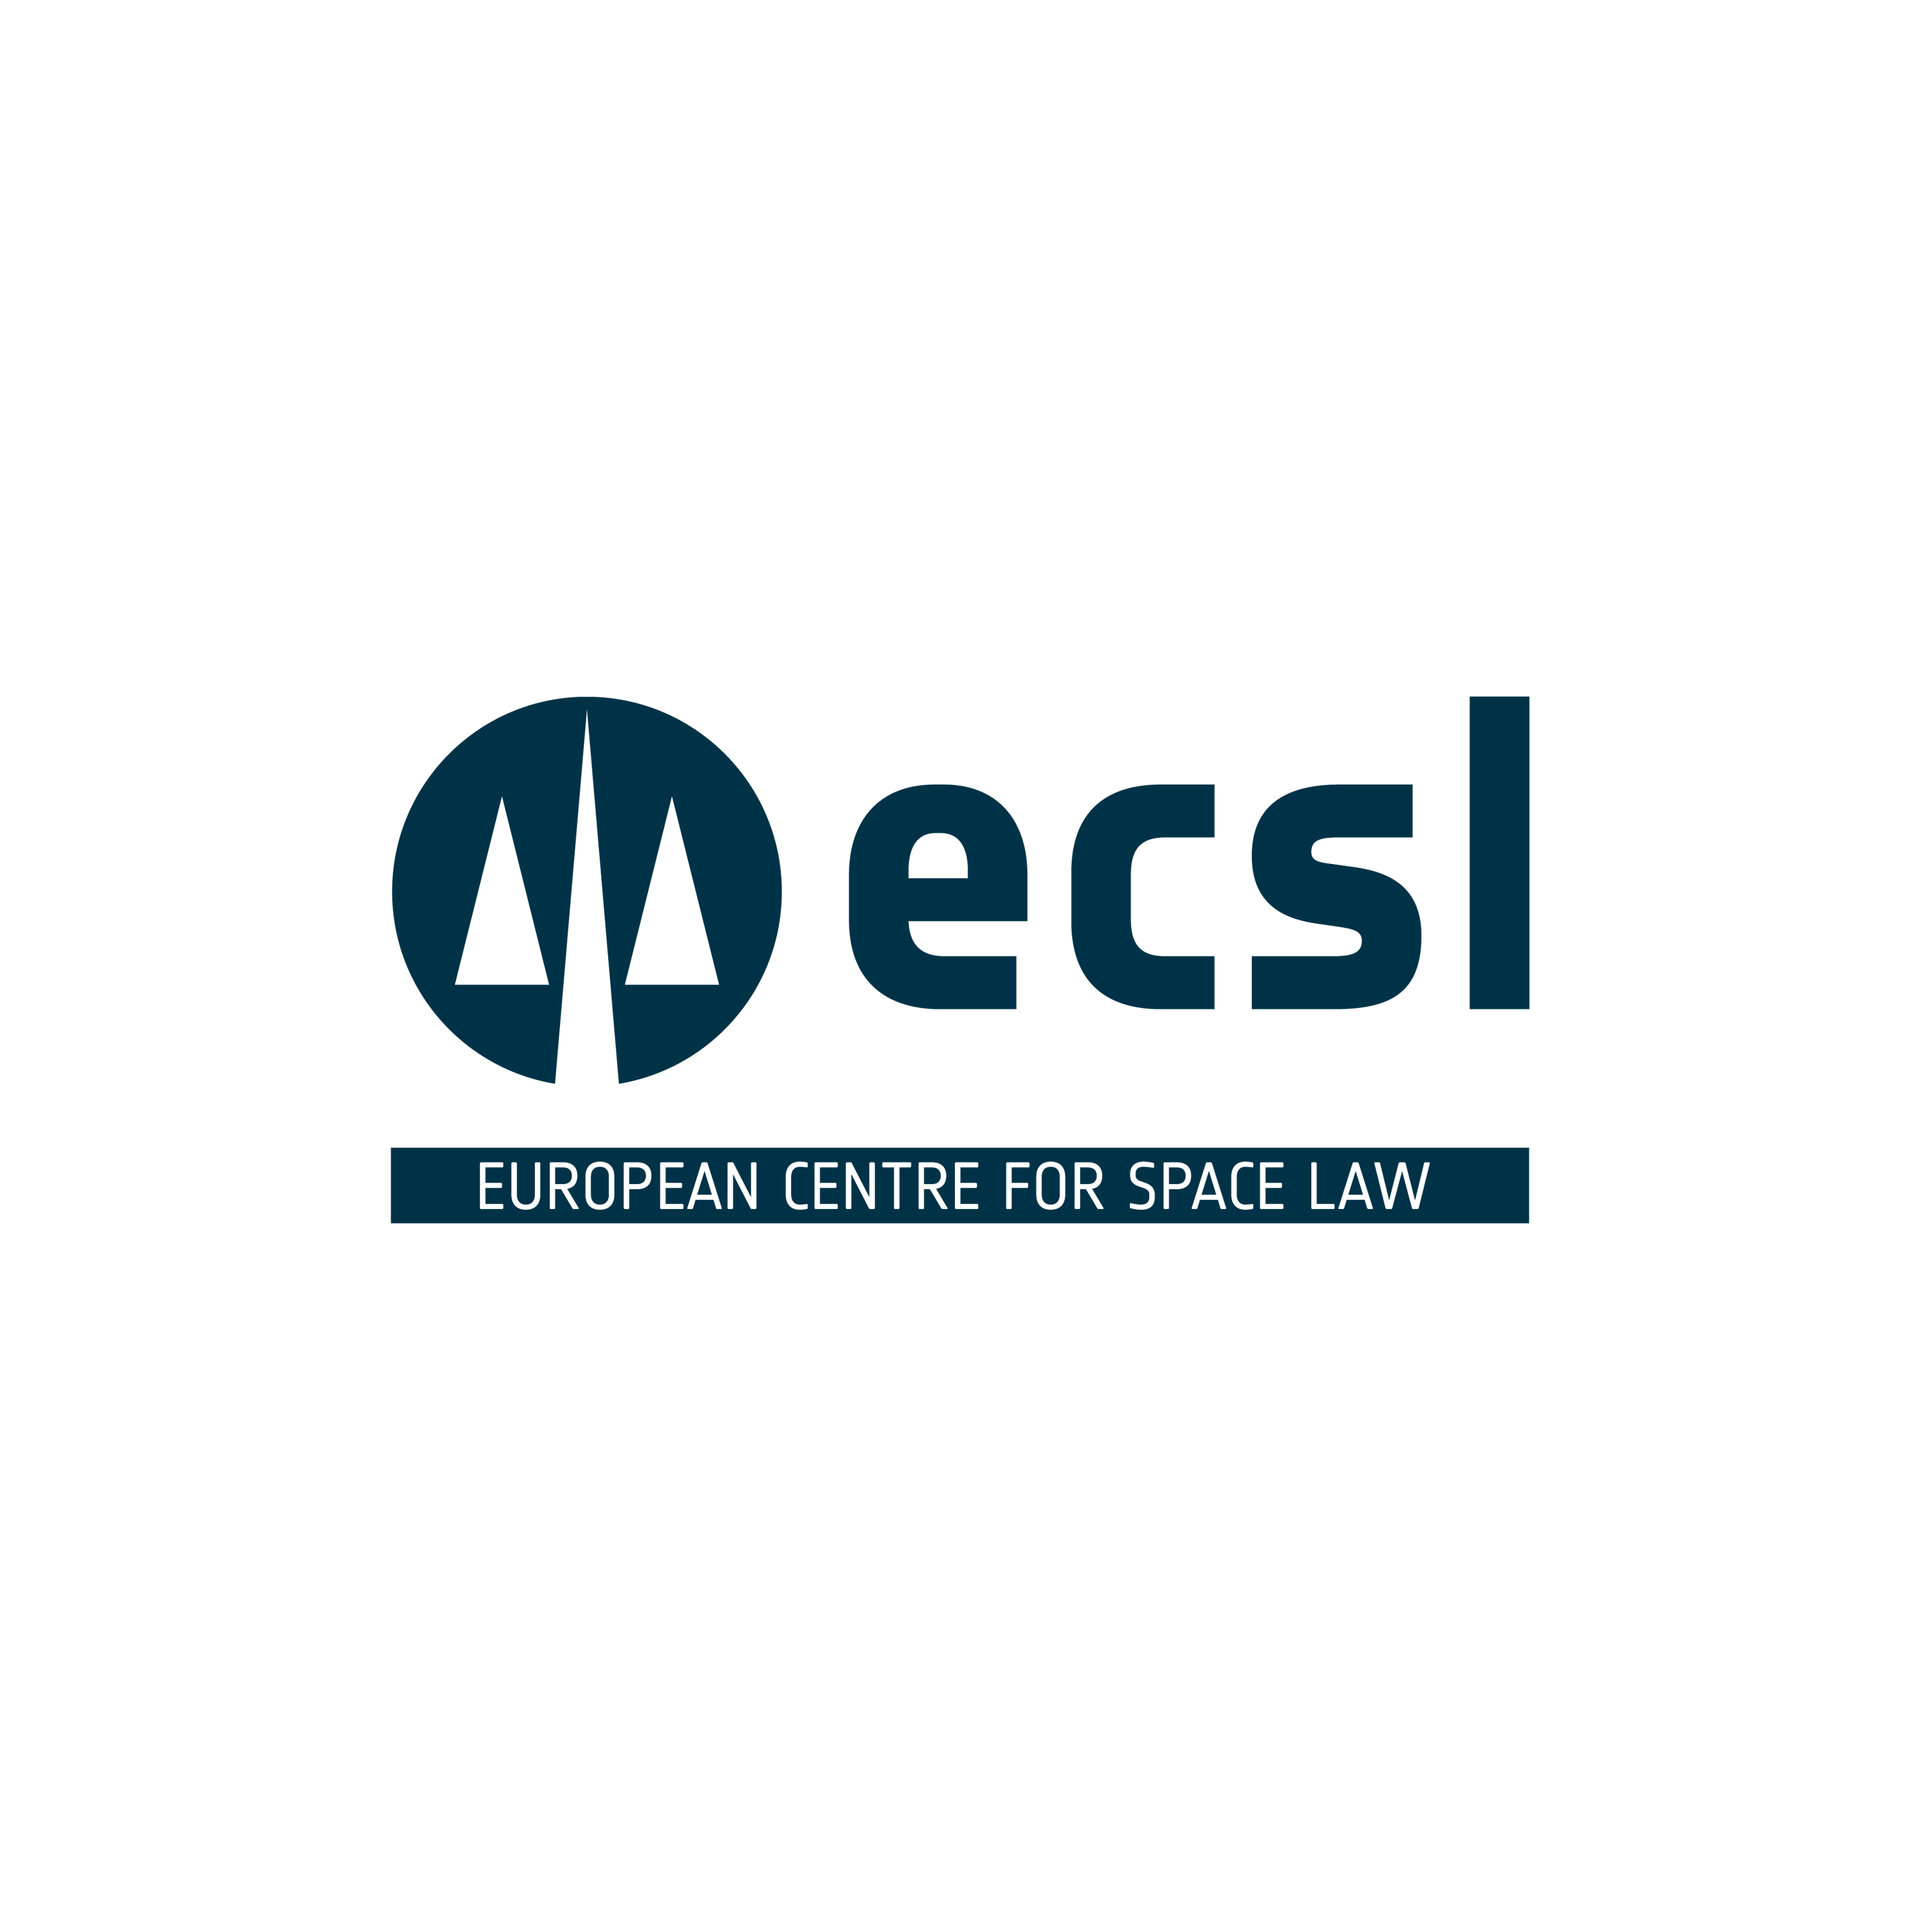 European Centre for Space Law